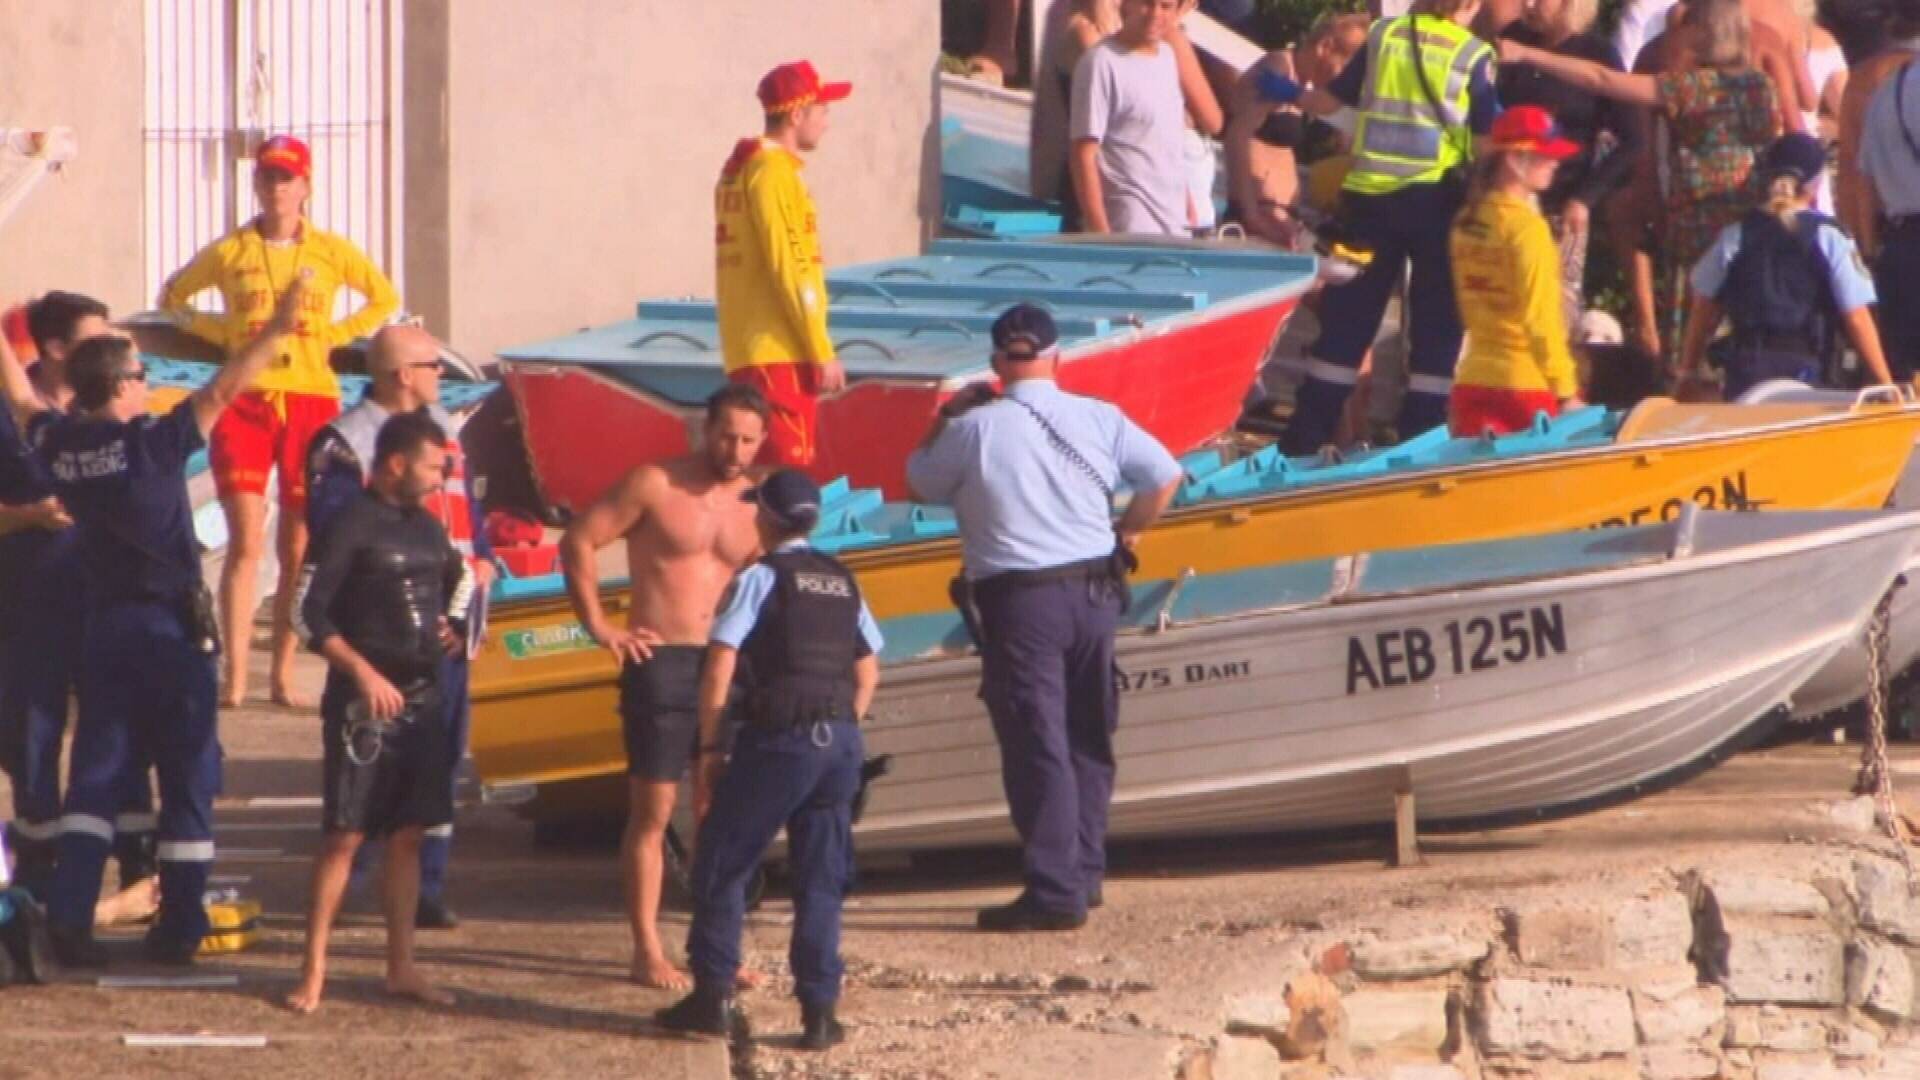 Police and life savers gather on the beach after the Russian DJ drowned.